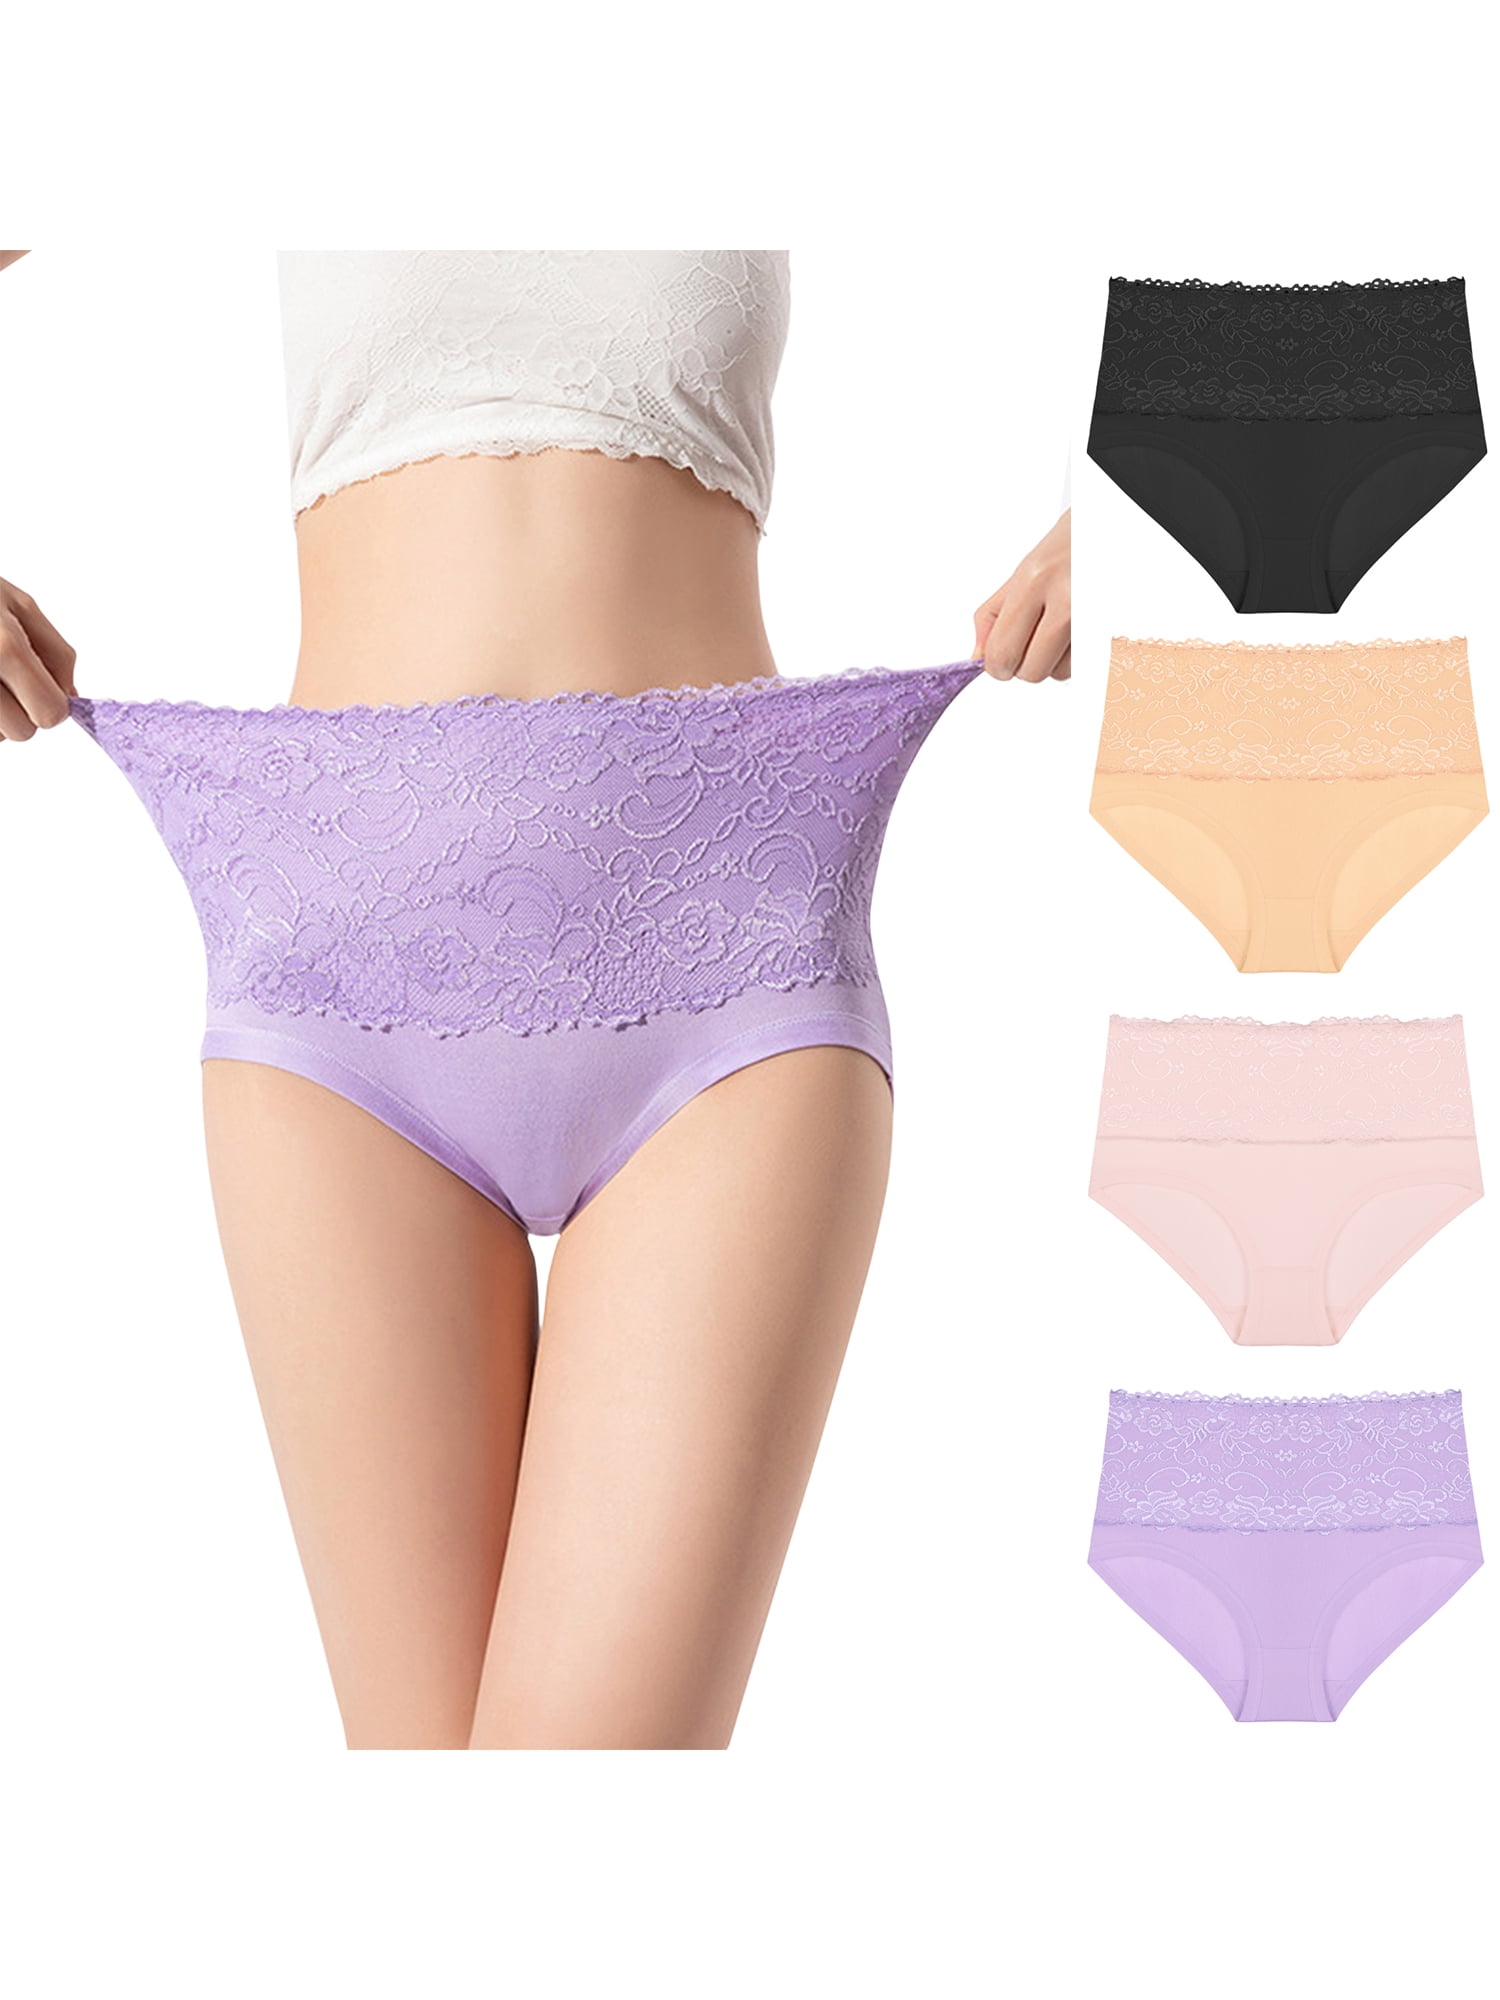 Women's Underwear Clearance — Prices Start at $0.99 Each at Walmart - The  Krazy Coupon Lady